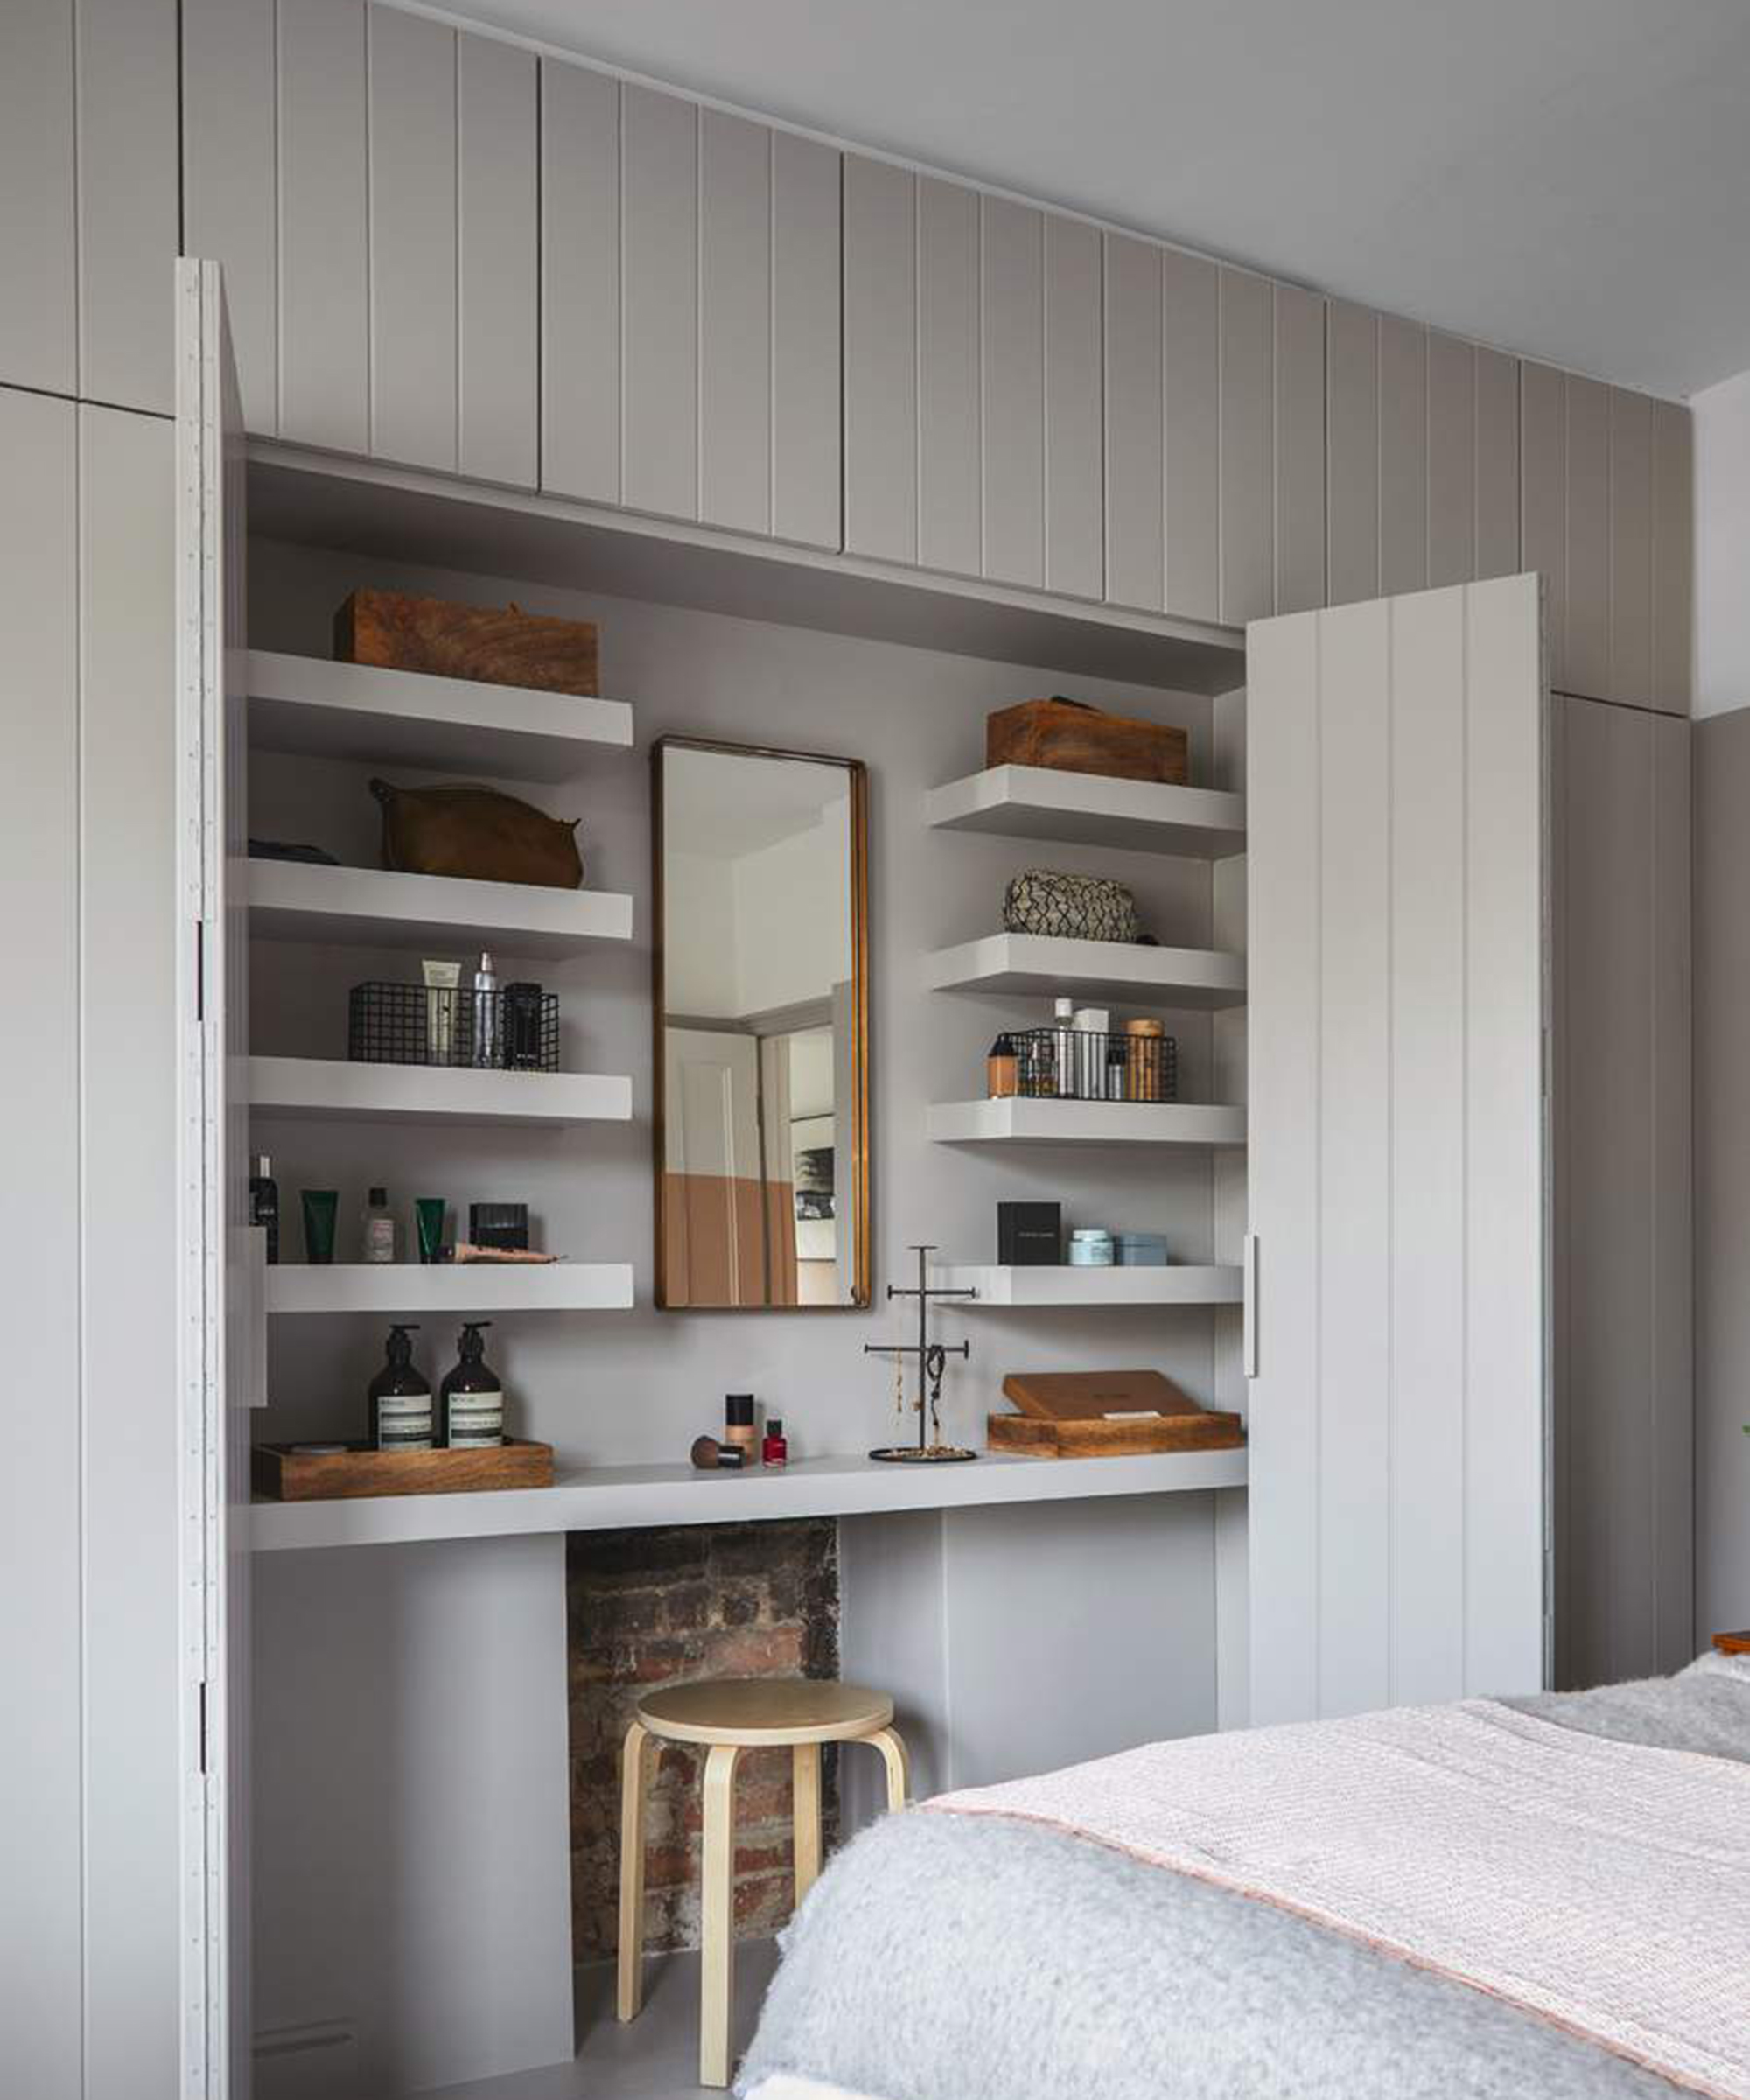 A master bedroom with grey wardrobe and dressing room niche with chair